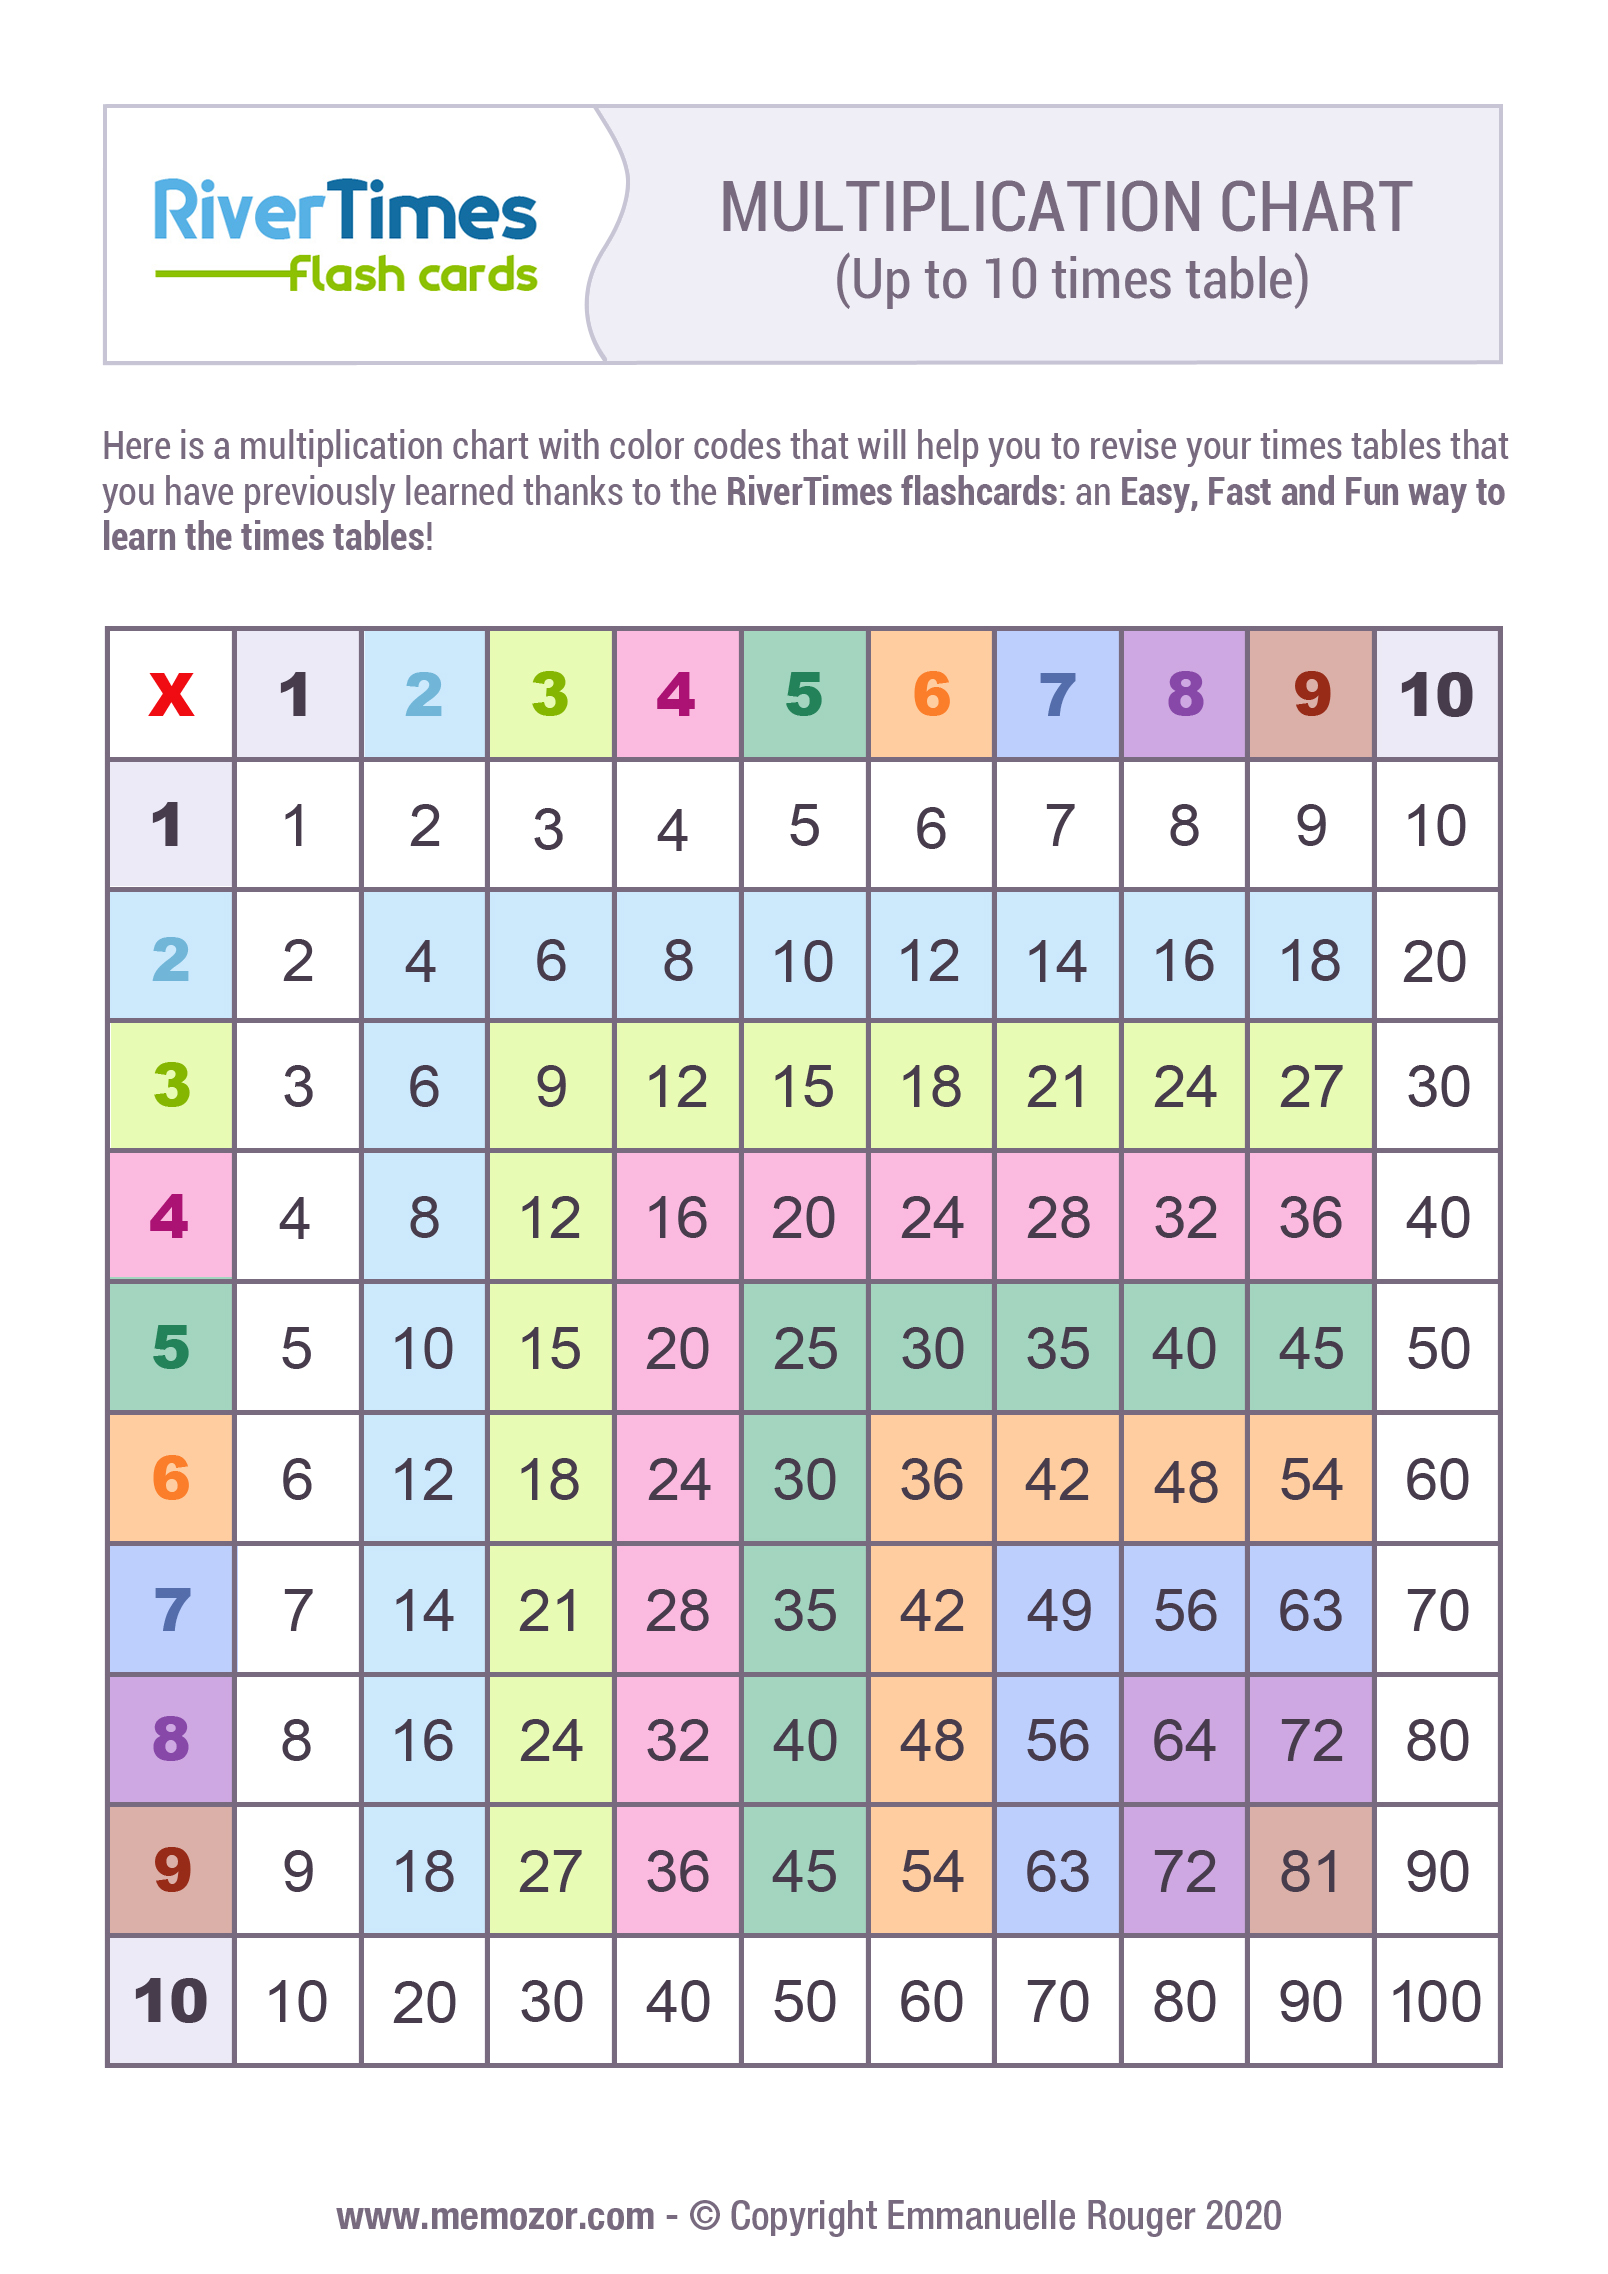 Multiplication Table While it is generally more important to know why